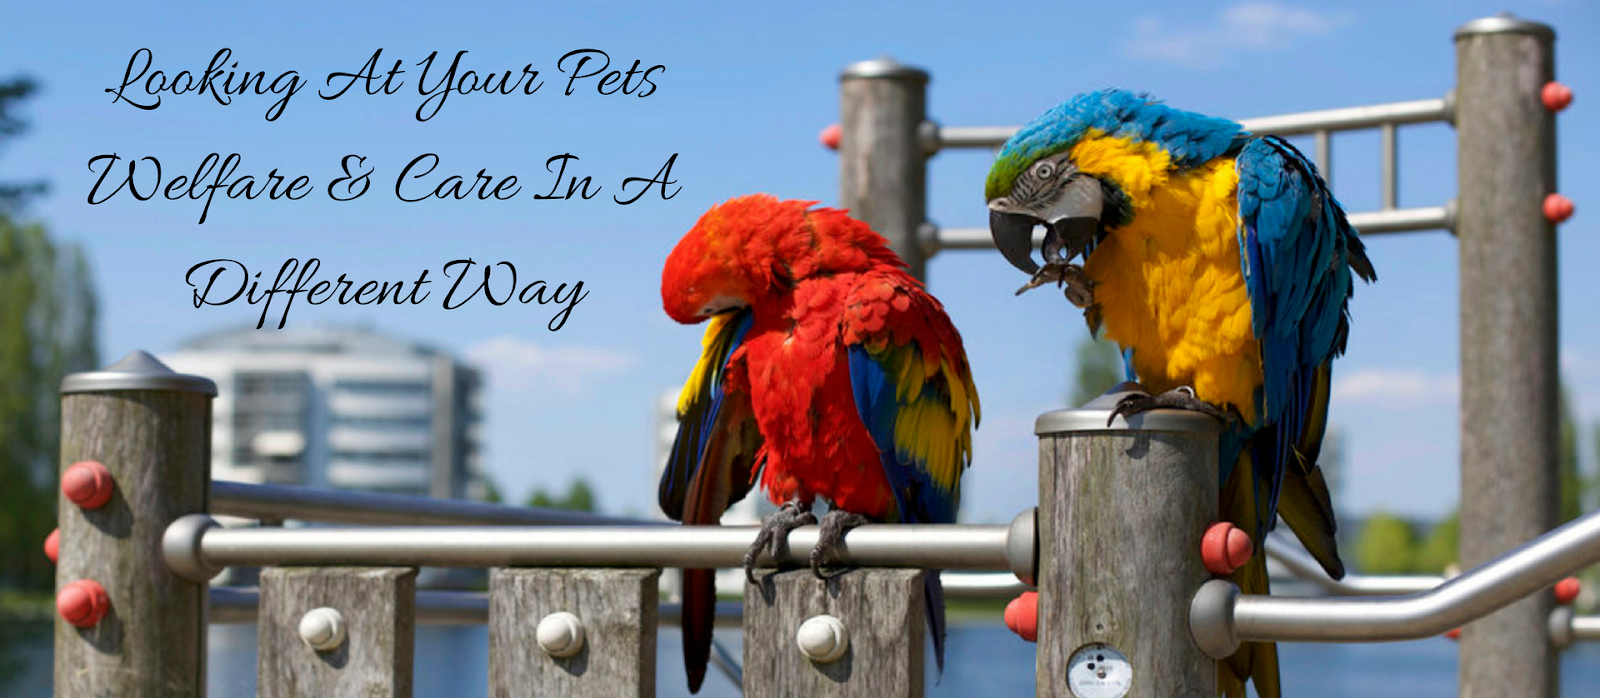 The Welfare And Care Of Your Pet The Parrot life Way